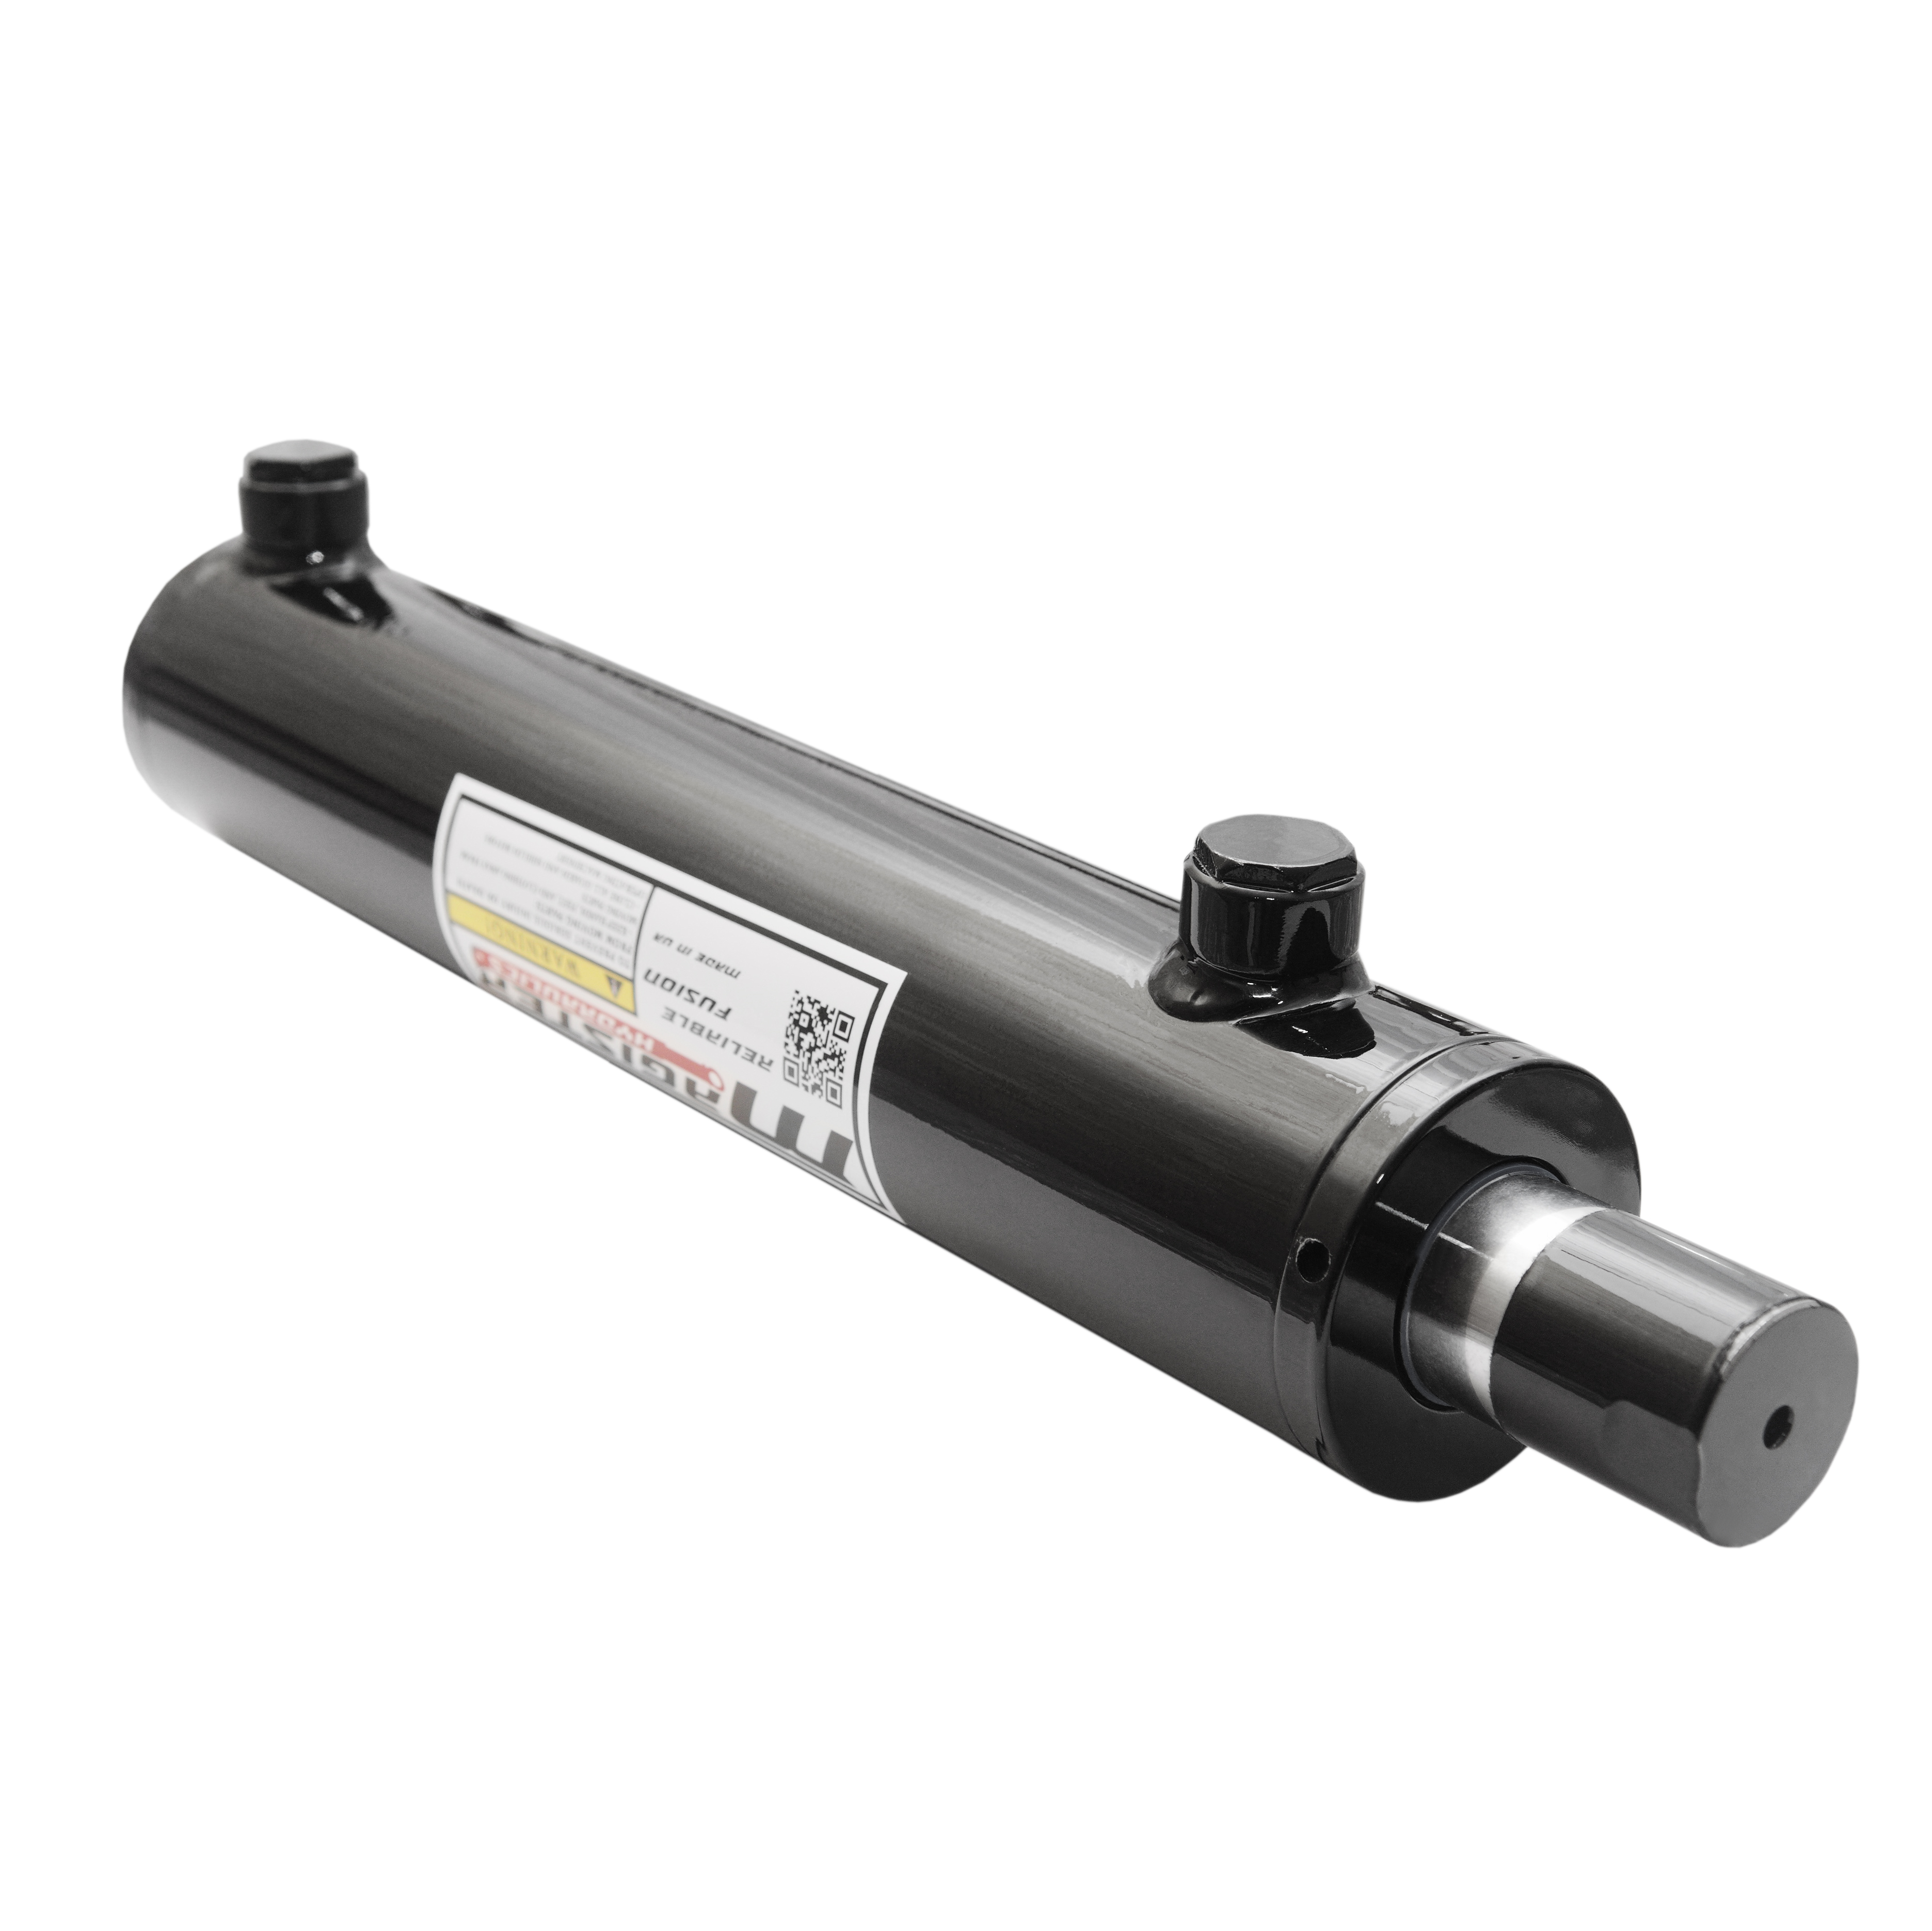 2 bore x 10 stroke hydraulic cylinder, welded universal double acting cylinder | Magister Hydraulics